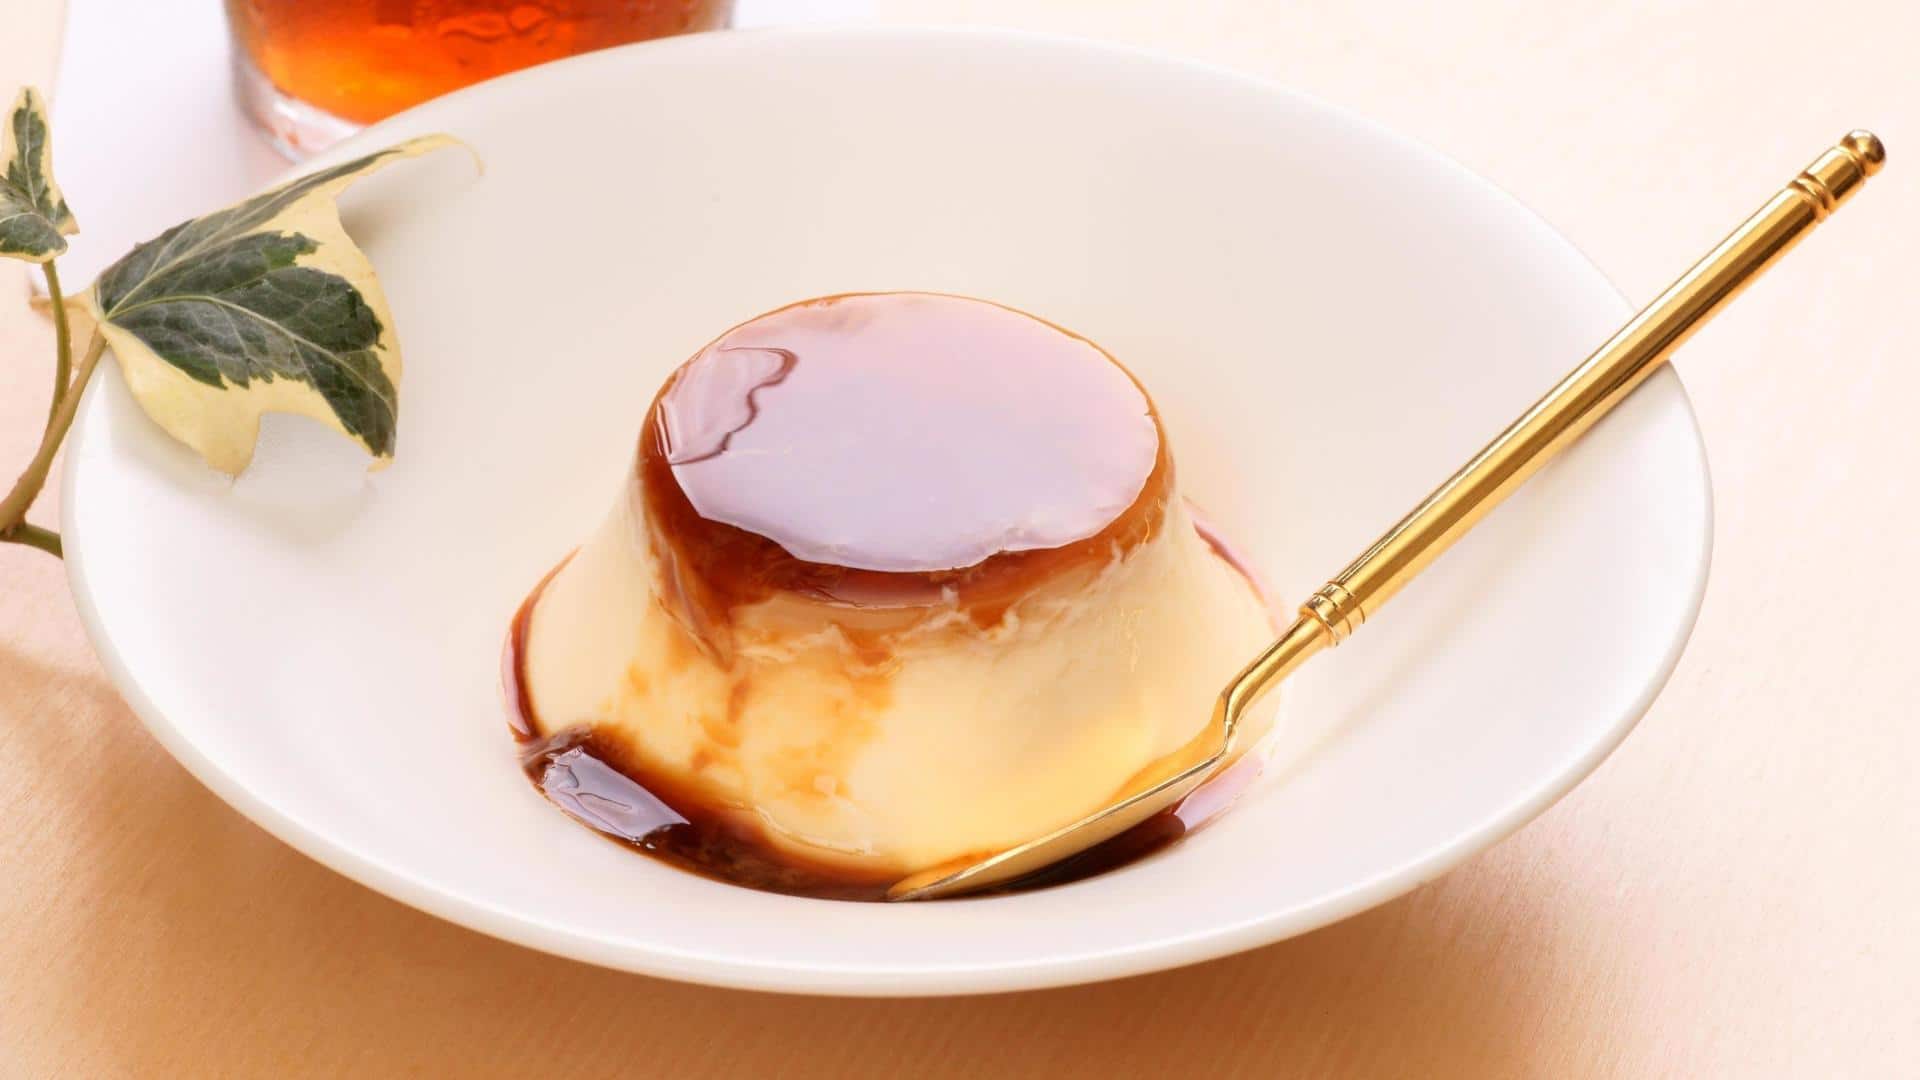 5 delicious pudding recipes you must try at home